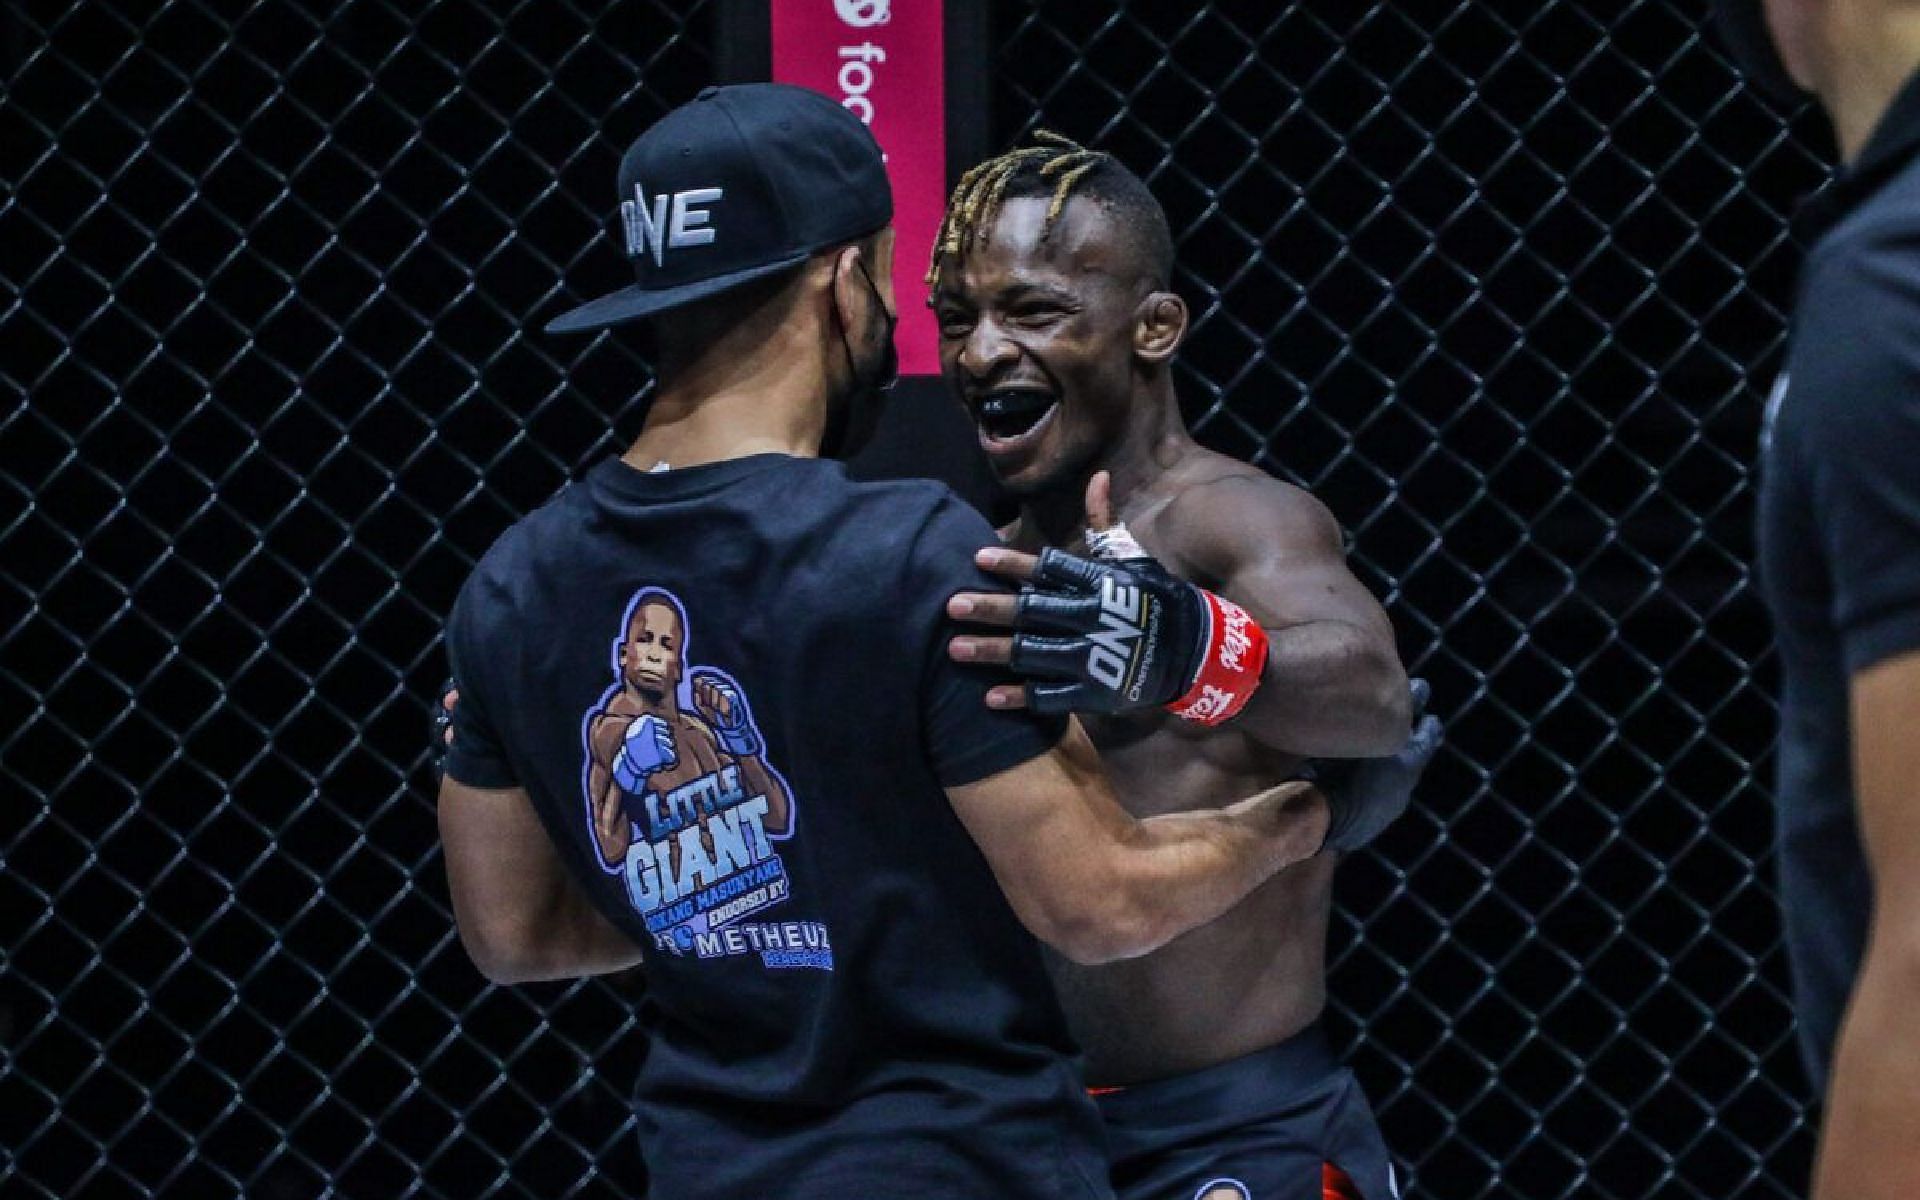 Bokang Masunyane says he got into the movie business by doing stunt work for an upcoming Netflix film that will air later this year [Image via ONE Championship]